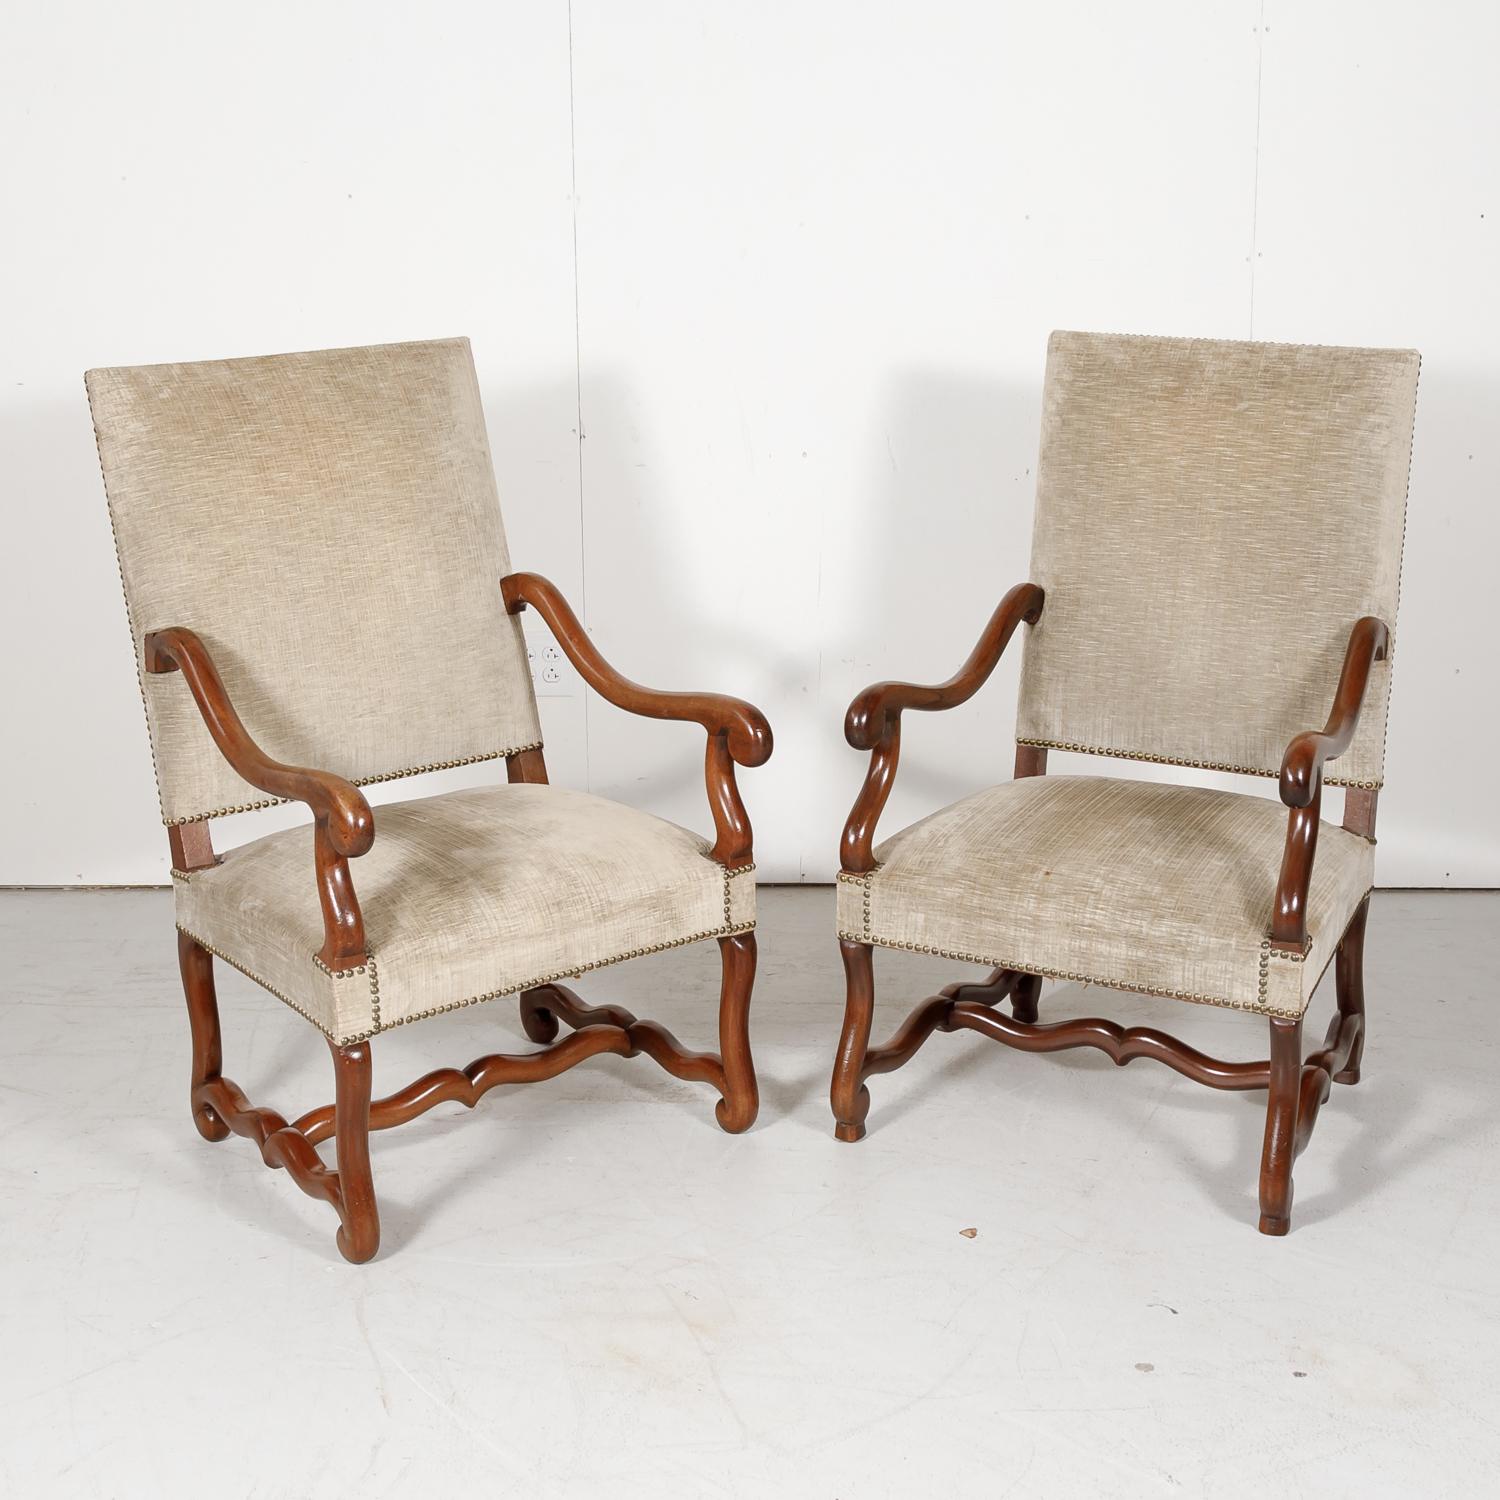 Lovely pair of 19th century French Louis XIII style os de mouton armchairs, circa 1880s. Handcrafted of sold walnut in Lyon, these oversized fireside armchairs have beautifully carved walnut frames with tall rectangular backs and gently scrolling